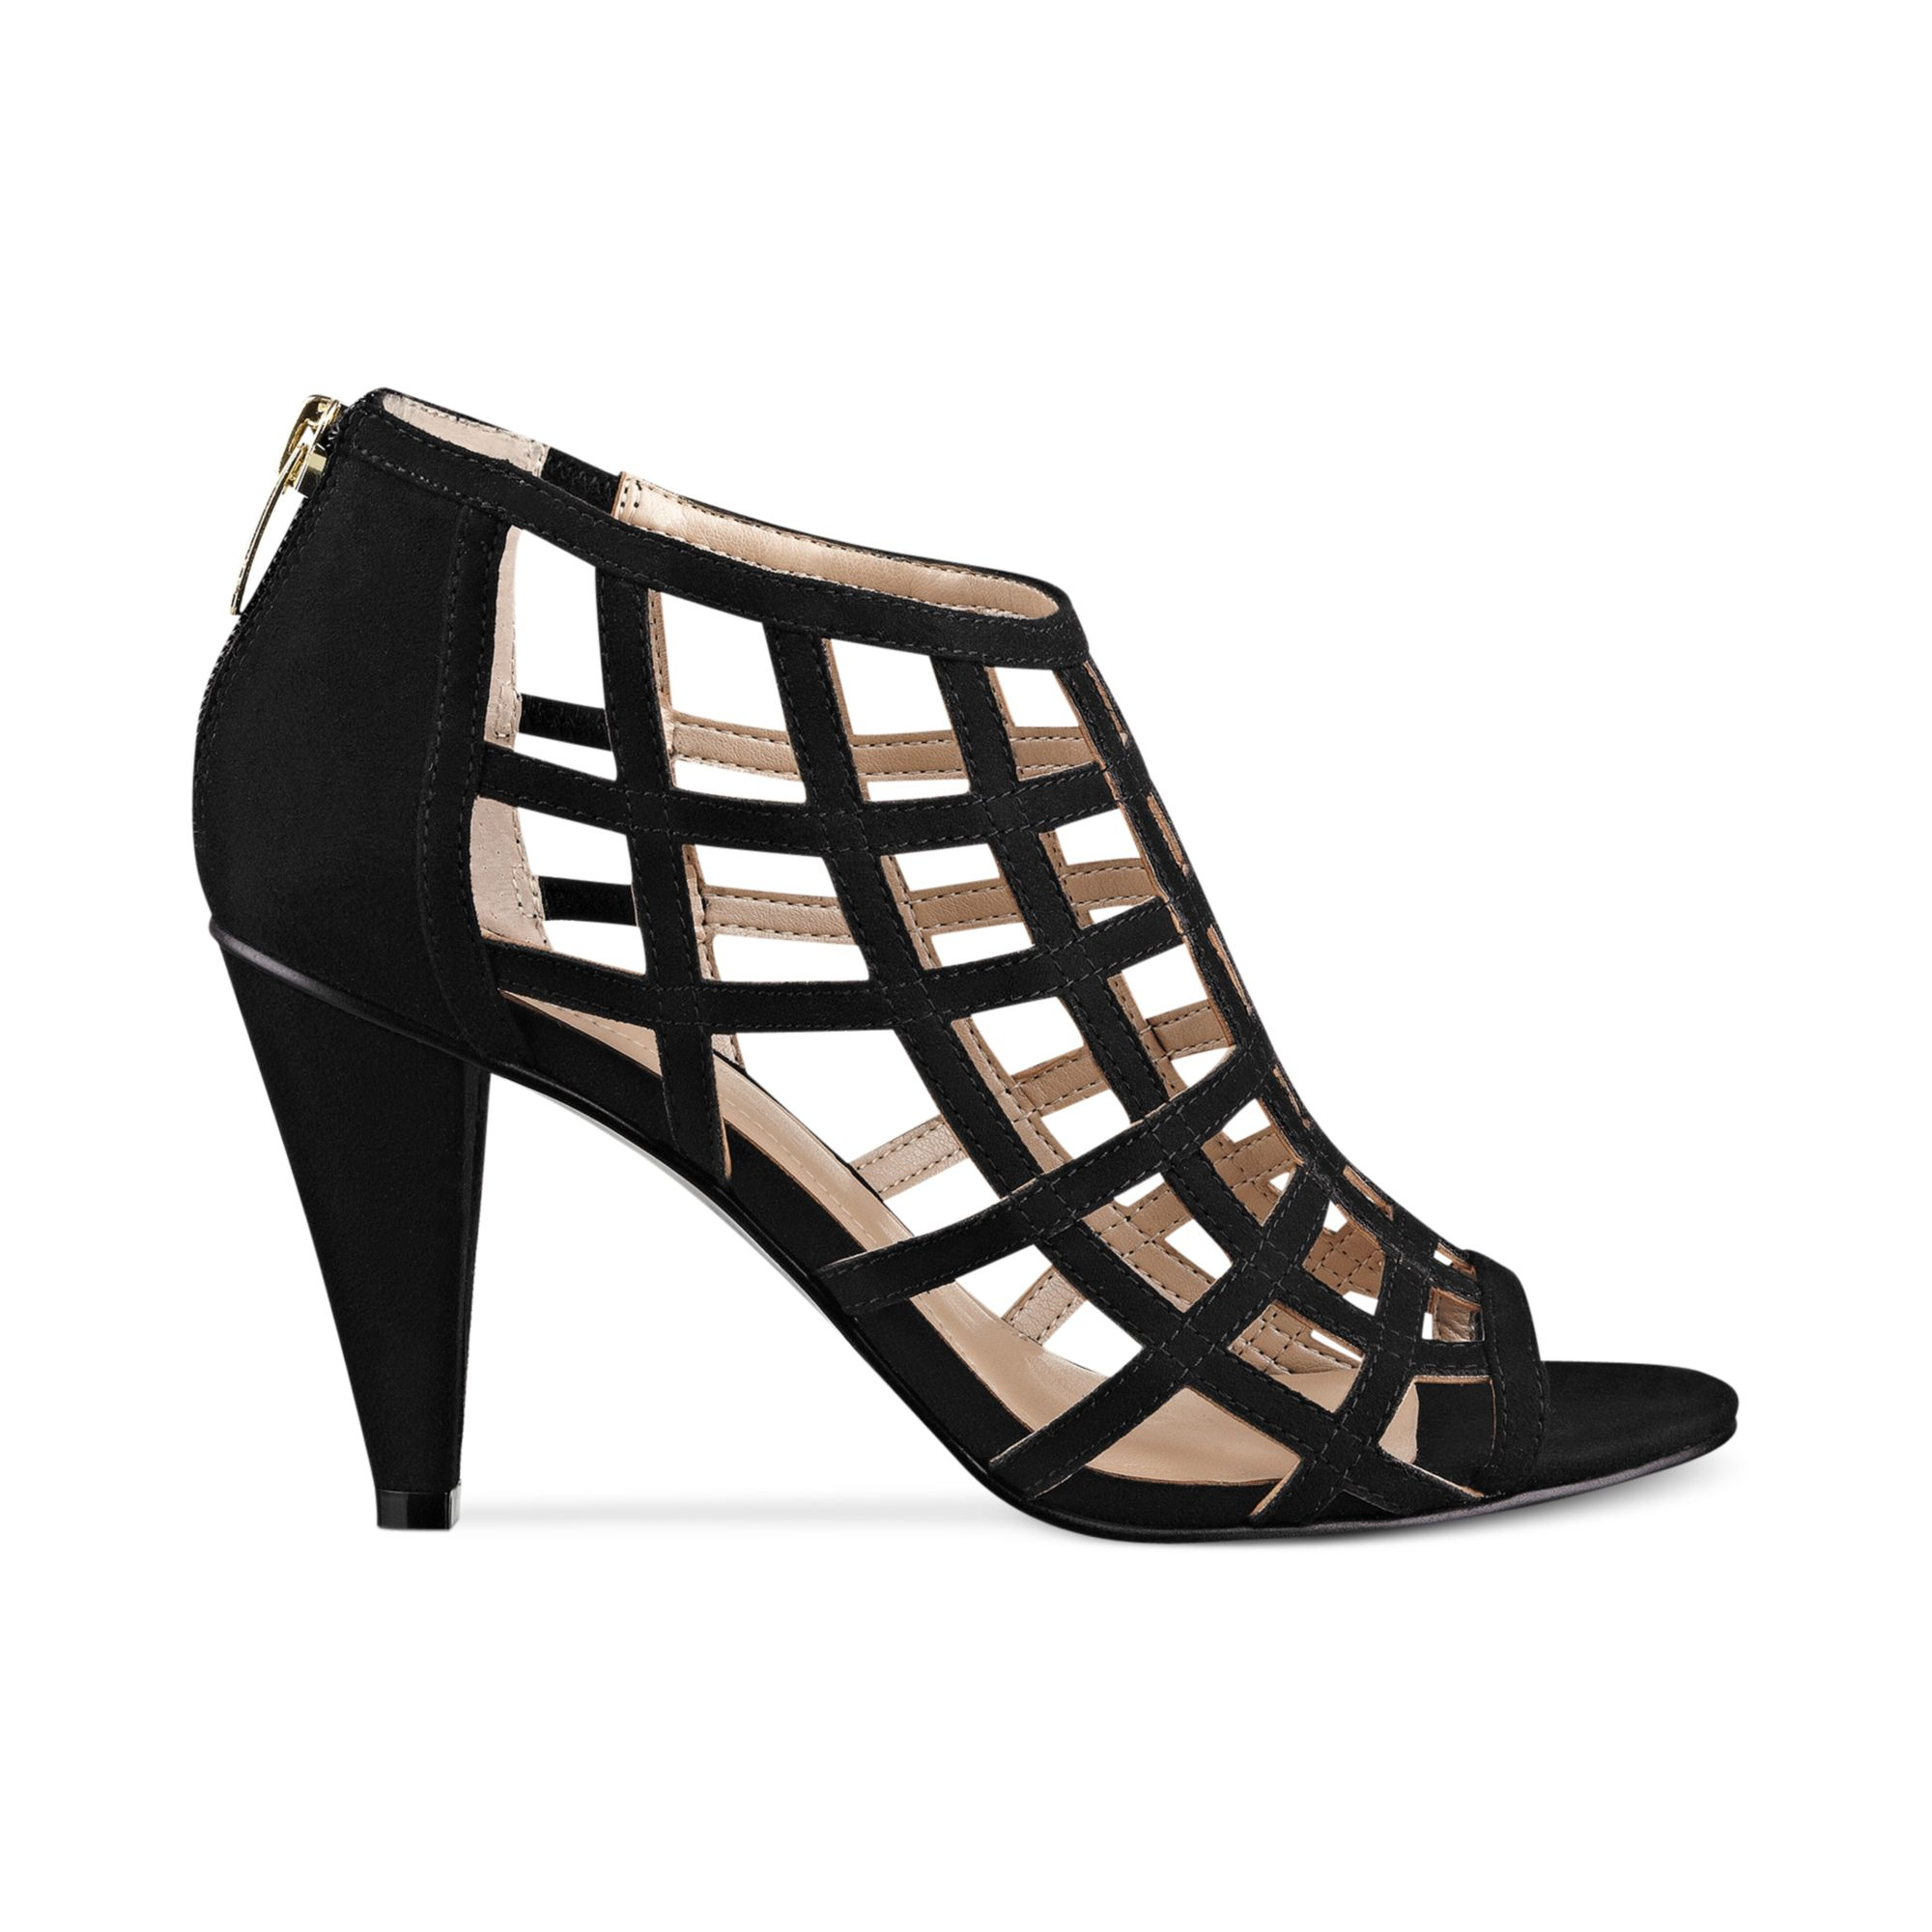 Marc fisher Philo Caged Sandals in Black | Lyst